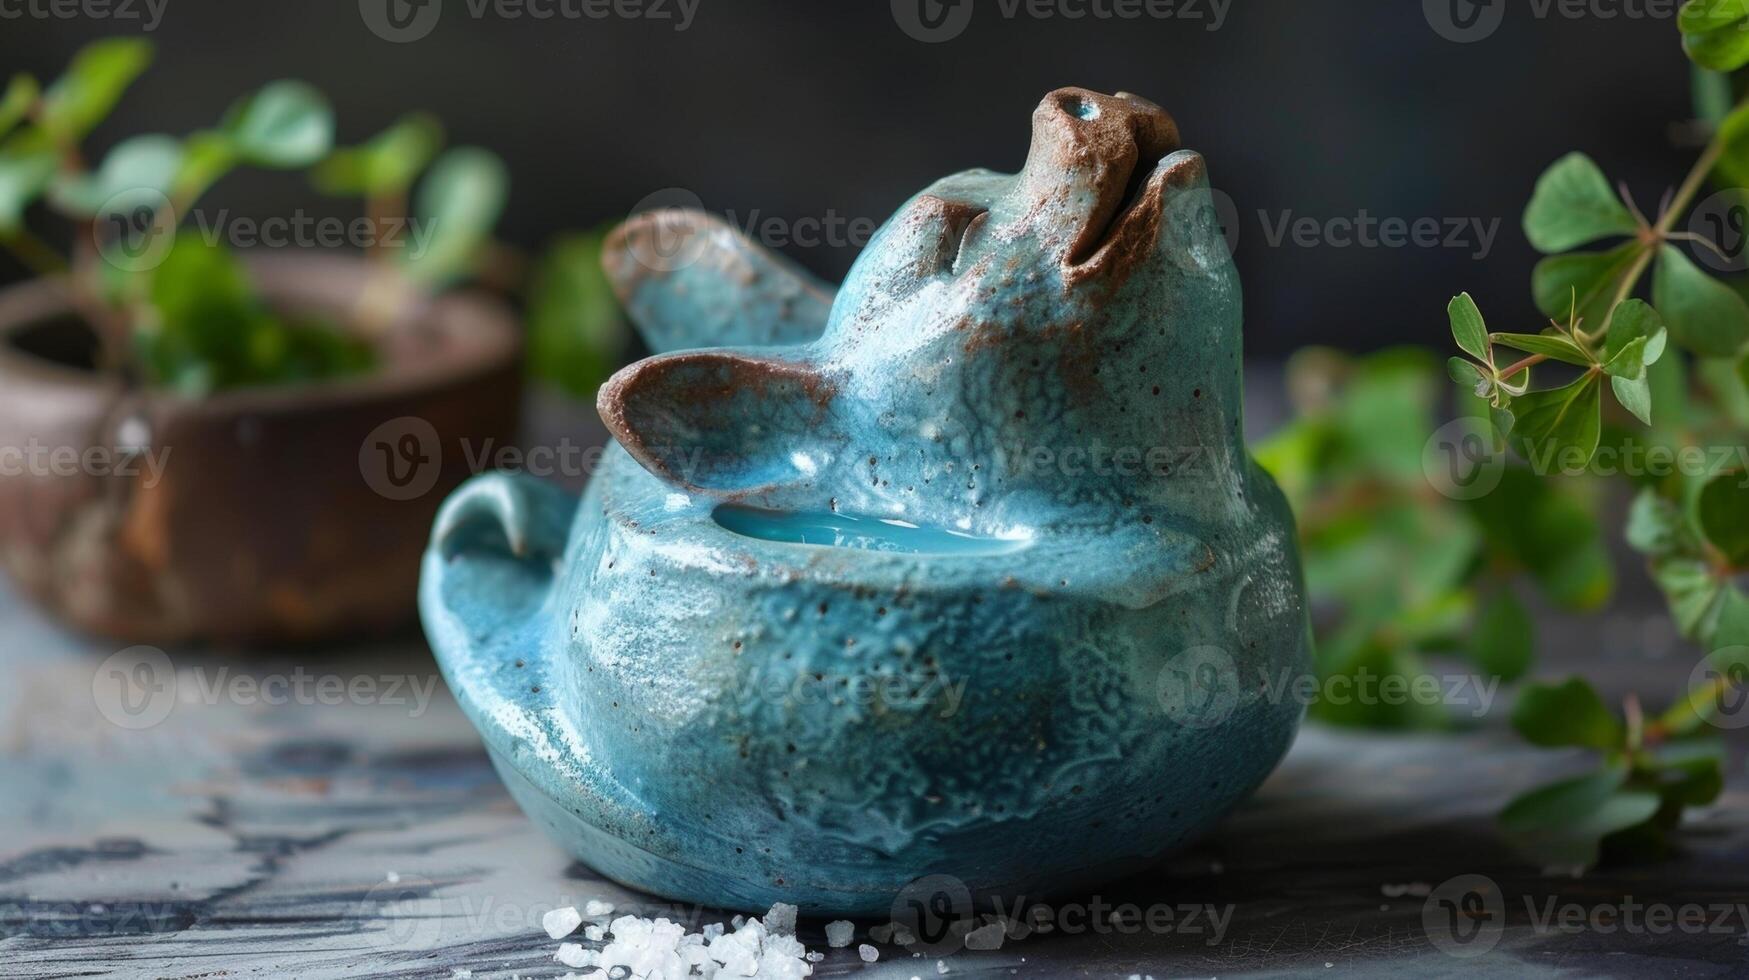 A unique salt pig container sculpted from clay and glazed with a bright blue hue designed to easily dispense salt while cooking. photo